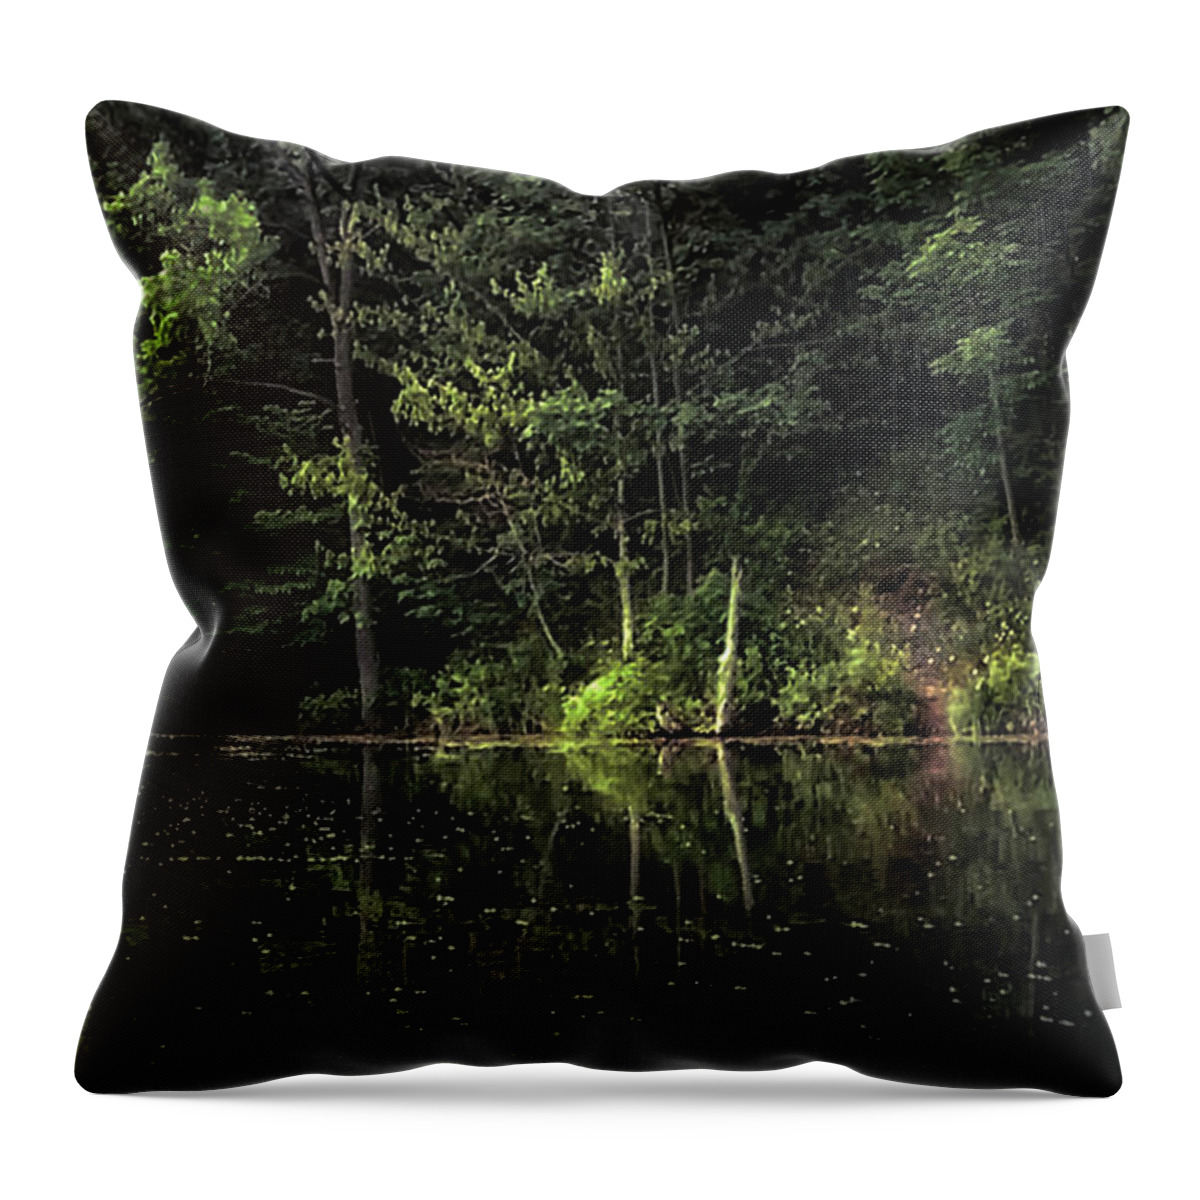 Lakes Throw Pillow featuring the photograph Calm Waters by Elaine Malott